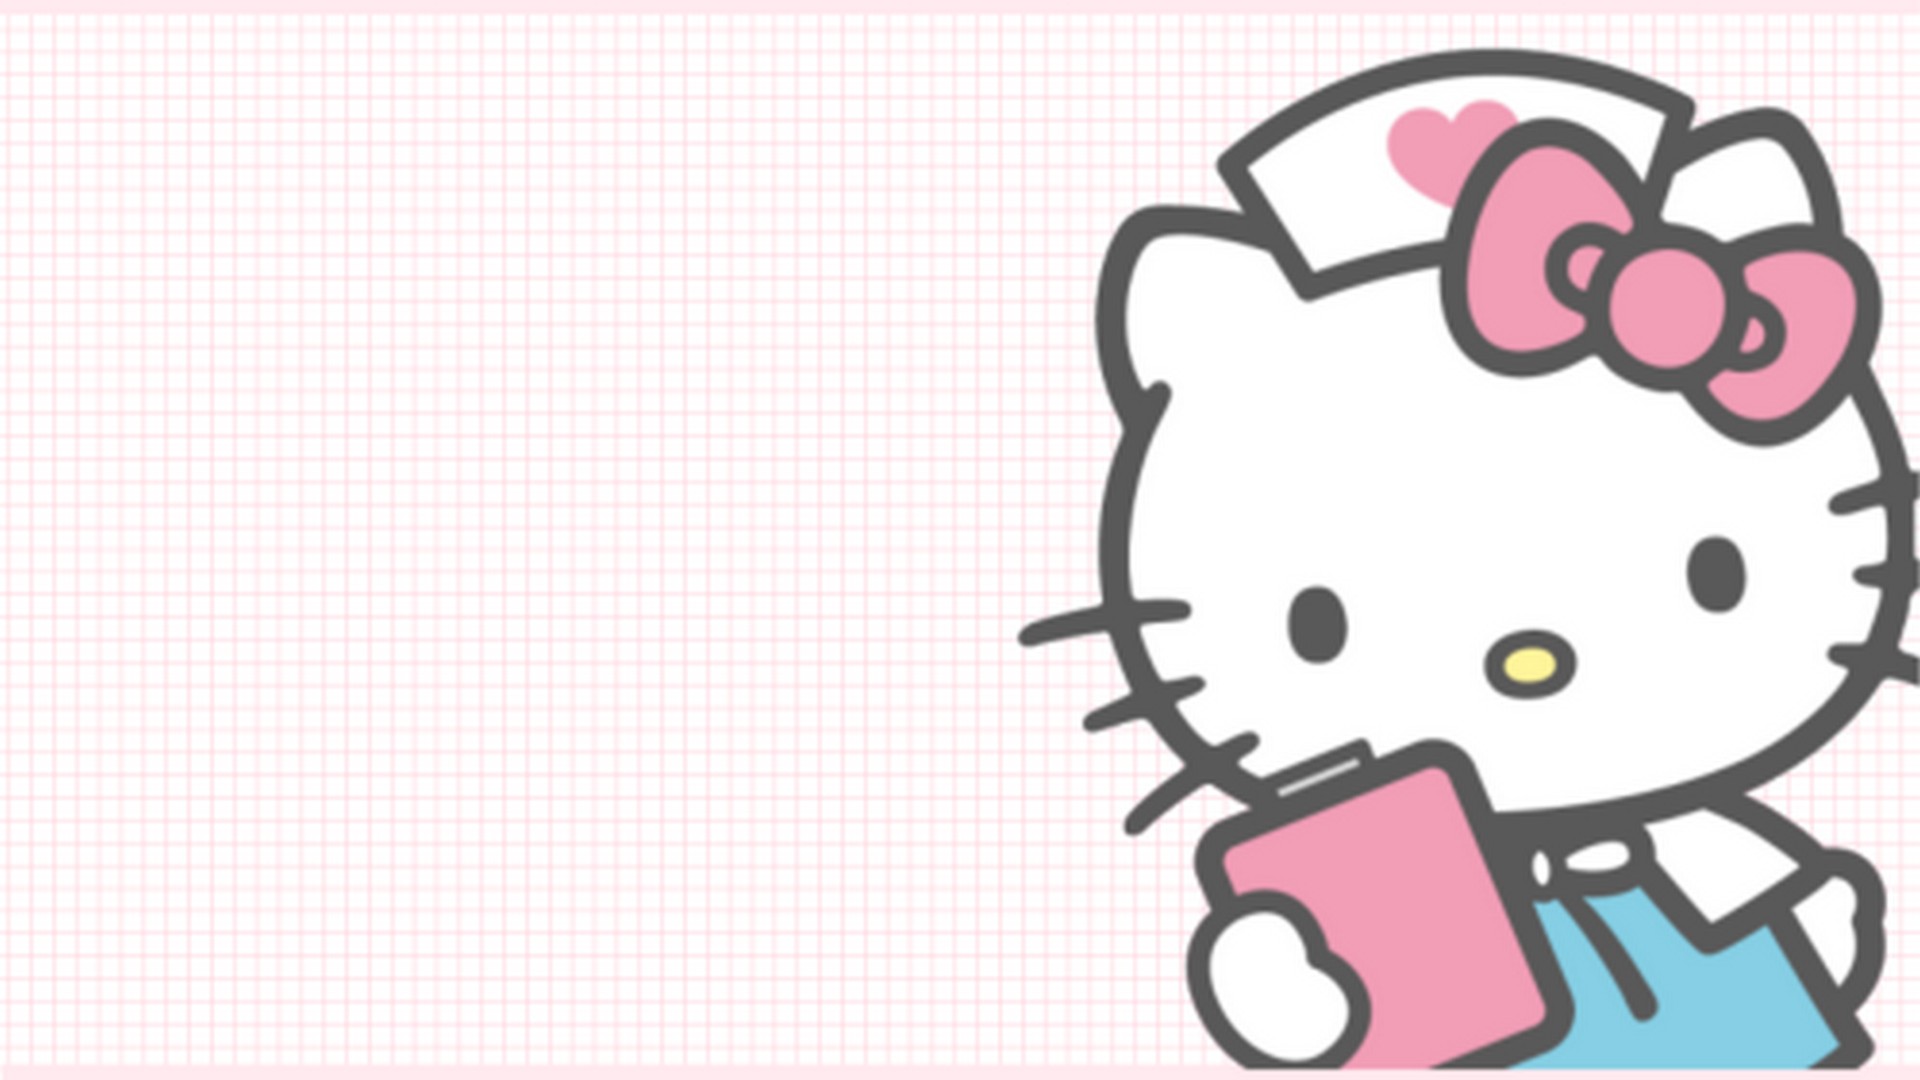 Wallpaper Hello Kitty Characters Desktop with image resolution 1920x1080 pixel. You can use this wallpaper as background for your desktop Computer Screensavers, Android or iPhone smartphones